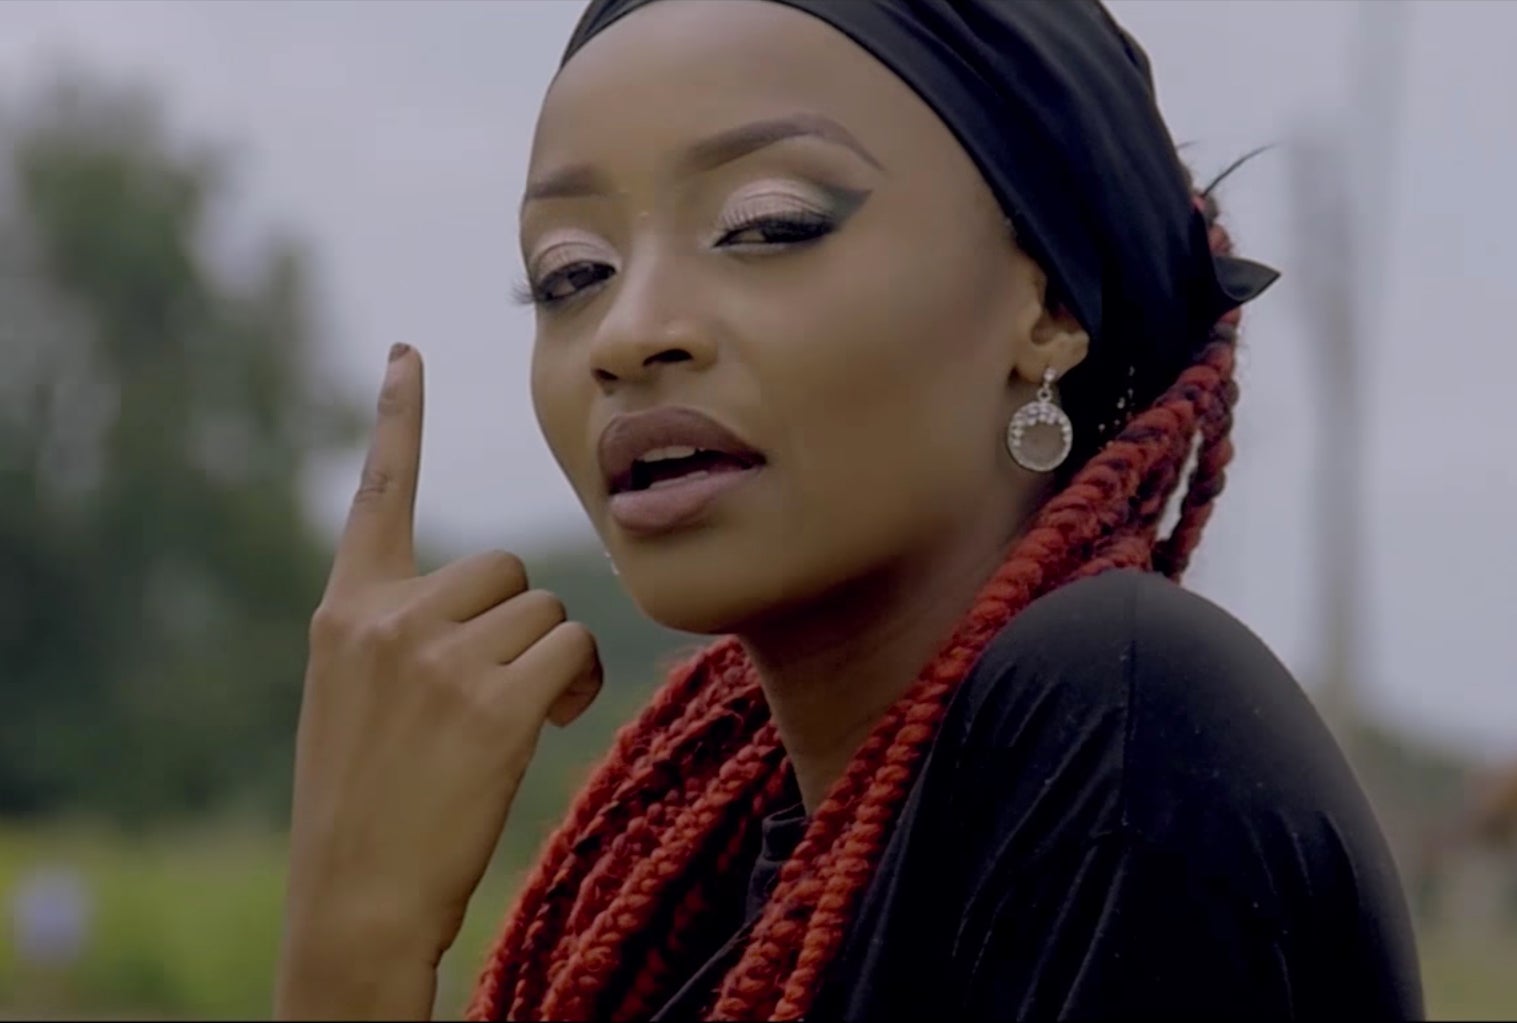 Hausa Muslim Sex - Nigerian actress banned from films for starring in 'immoral' pop music video  | The Independent | The Independent